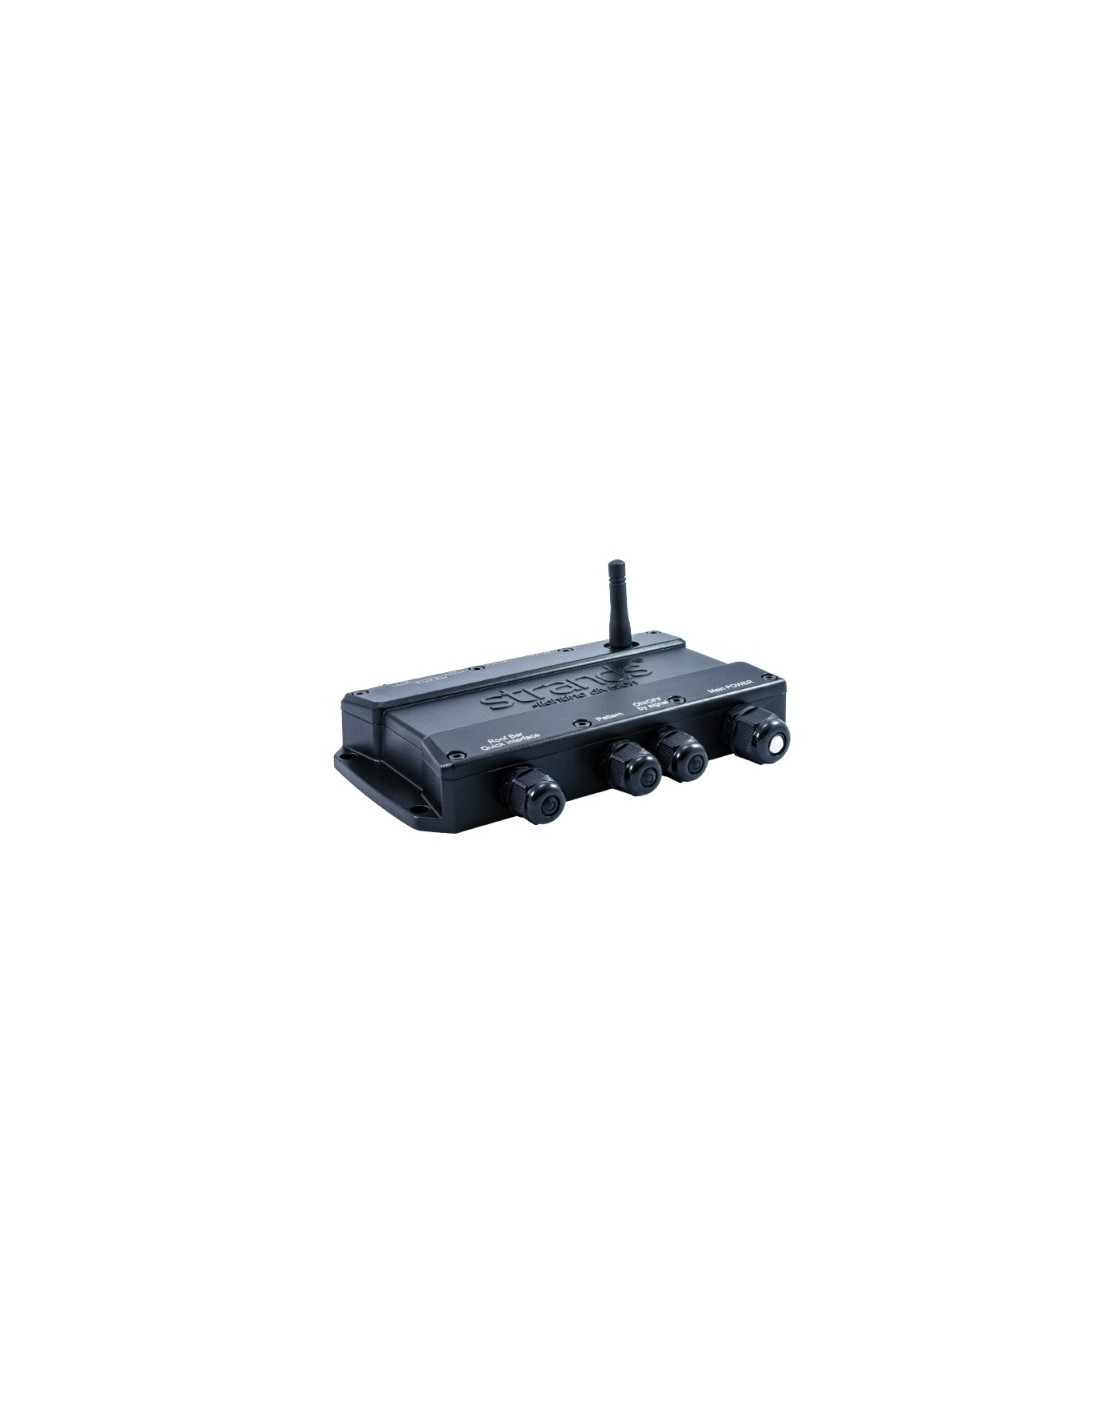 CRUISE LIGHT WIRELESS CONTROLLER SUITABLE FOR CRUISE LIGHT ROOF BARS ETC. -  Strands